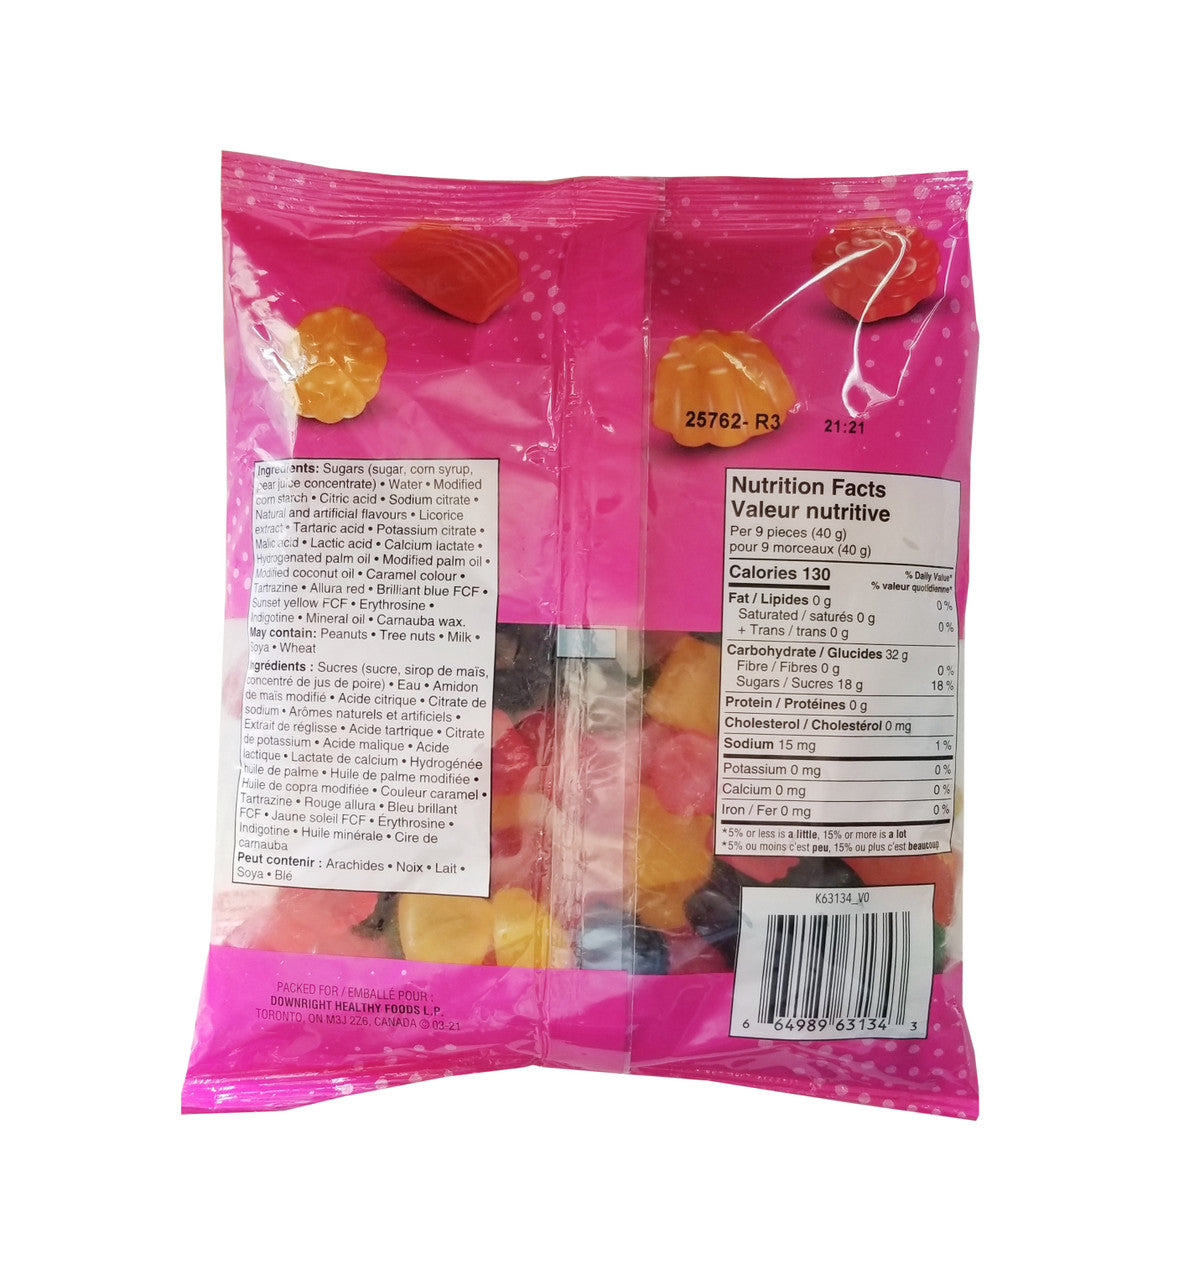 Joe's Tasty Travels, Jujubes Candy, 454g/1 lbs. Bag {Imported from Canada}